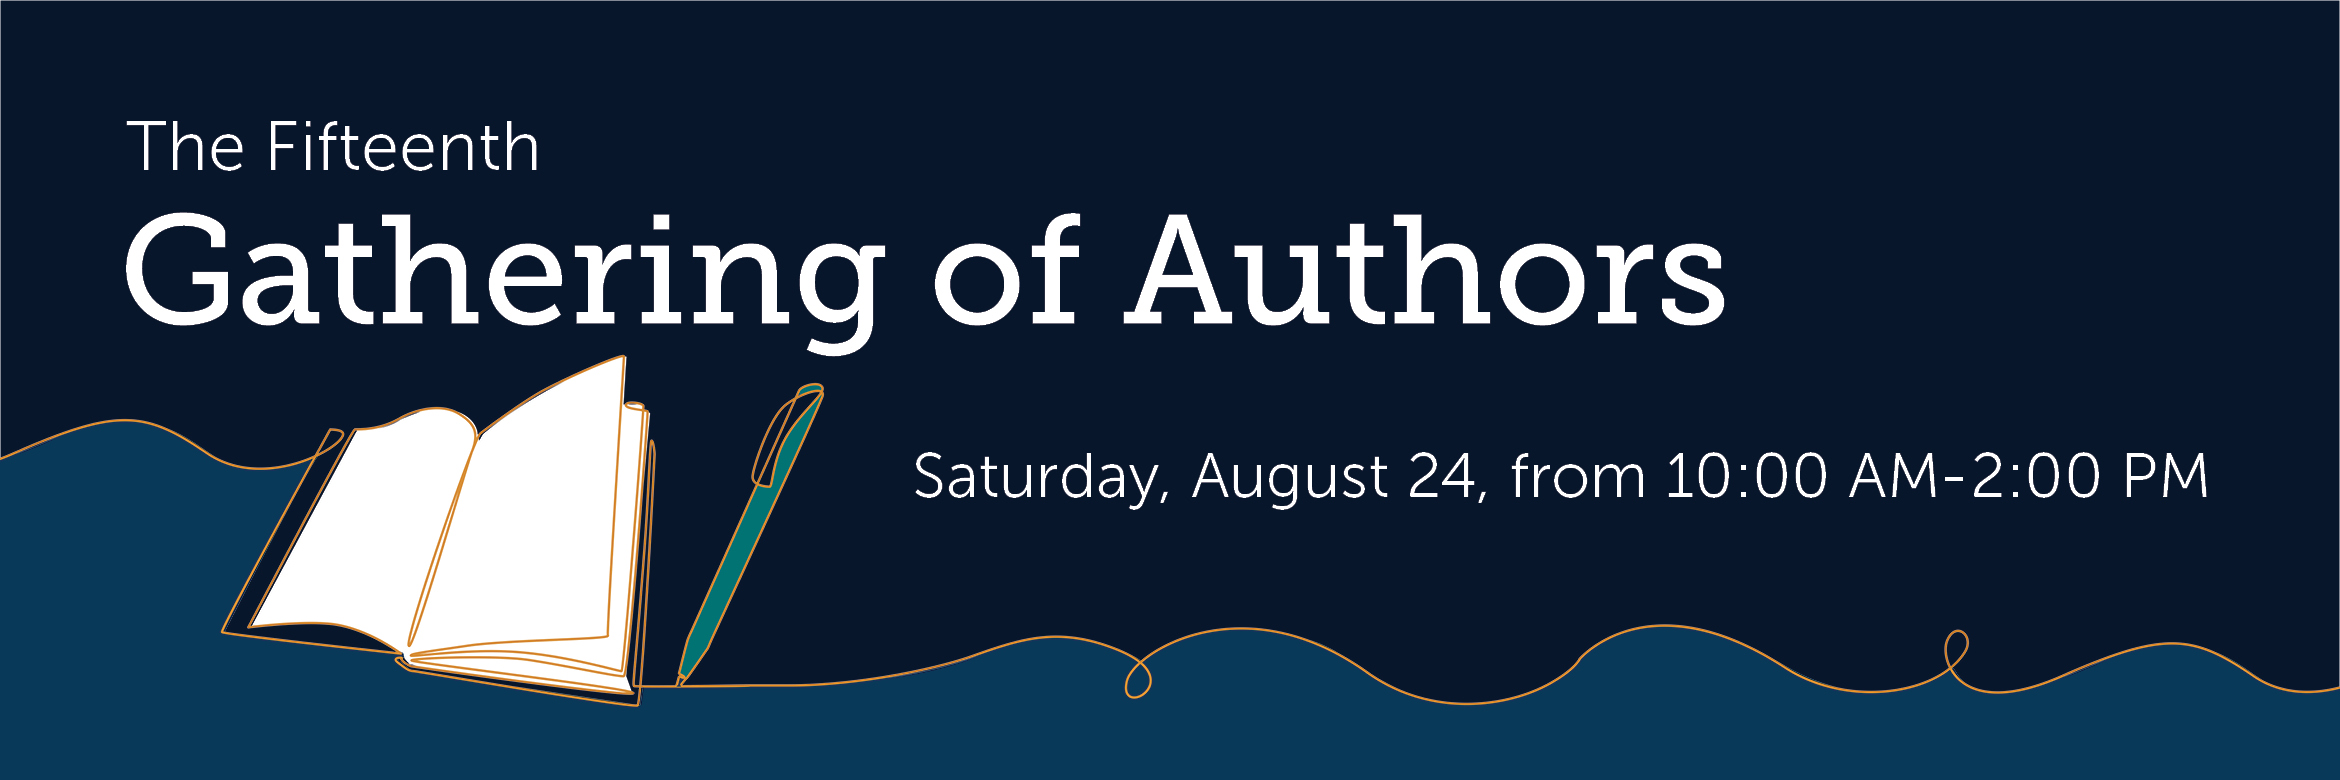 Gathering of Authors logo with open book and pen